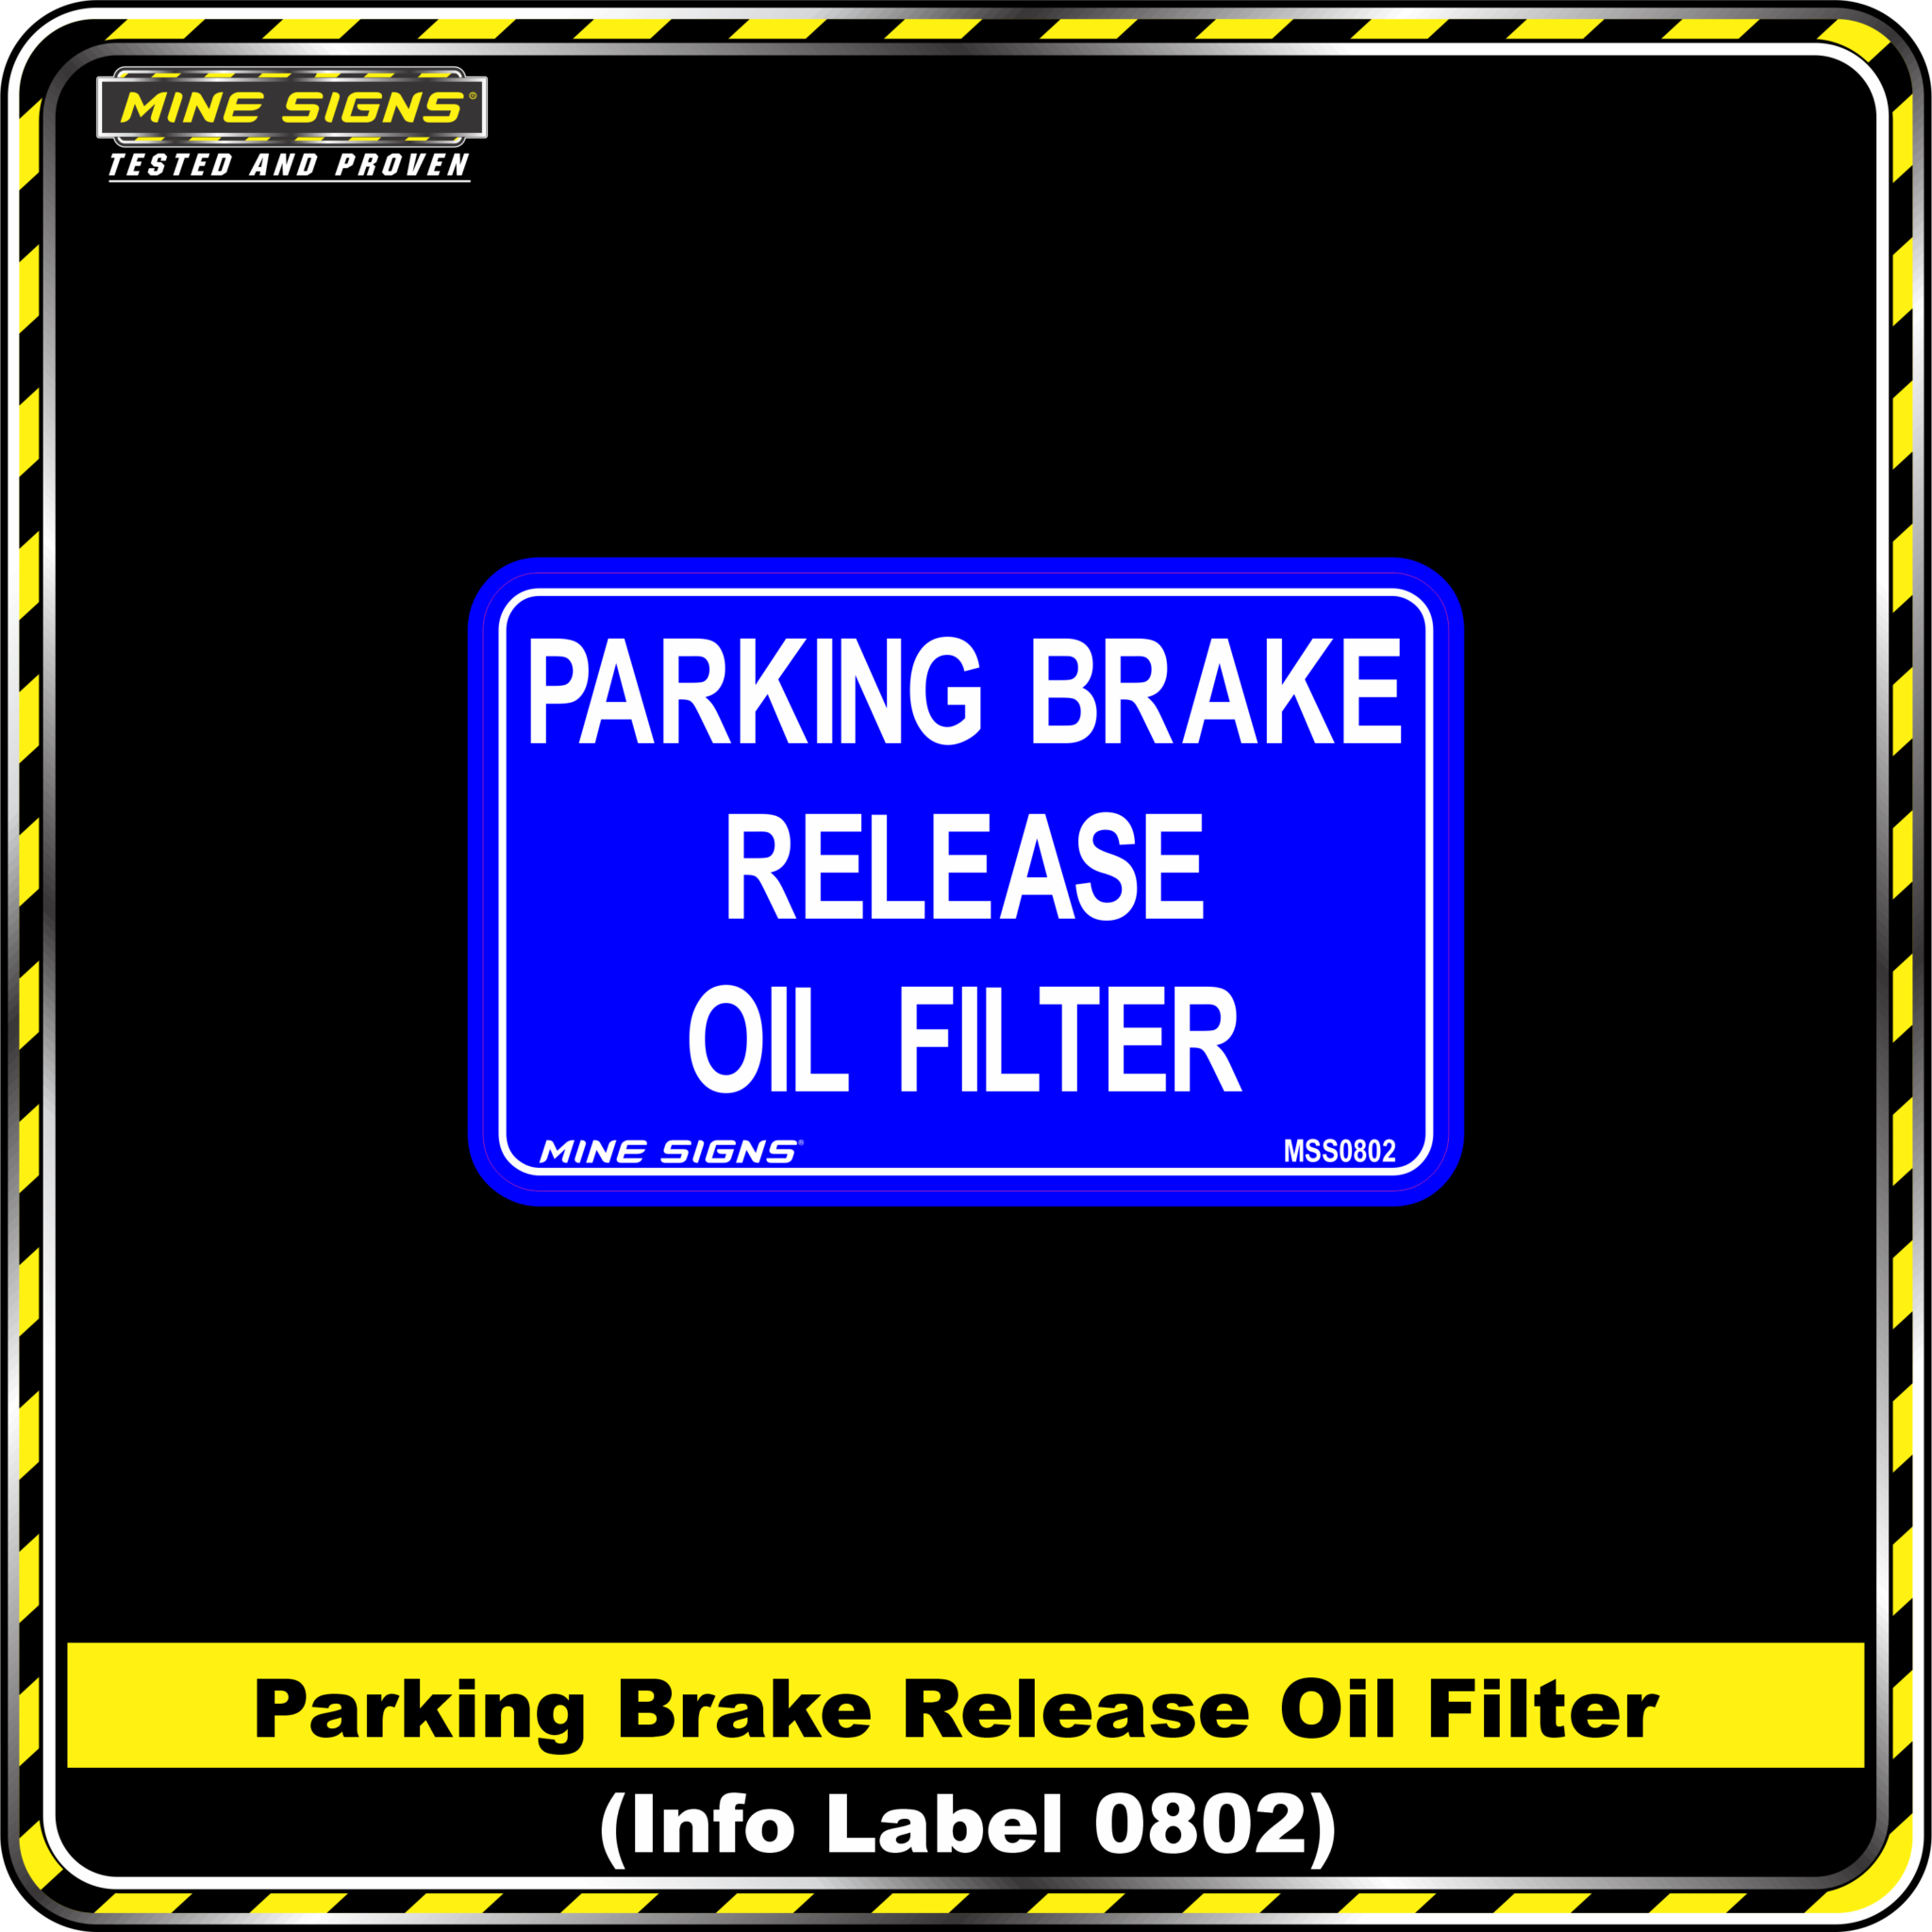 MS - Product Background - Safety Signs - Parking Brake Release Oil Filters 0802